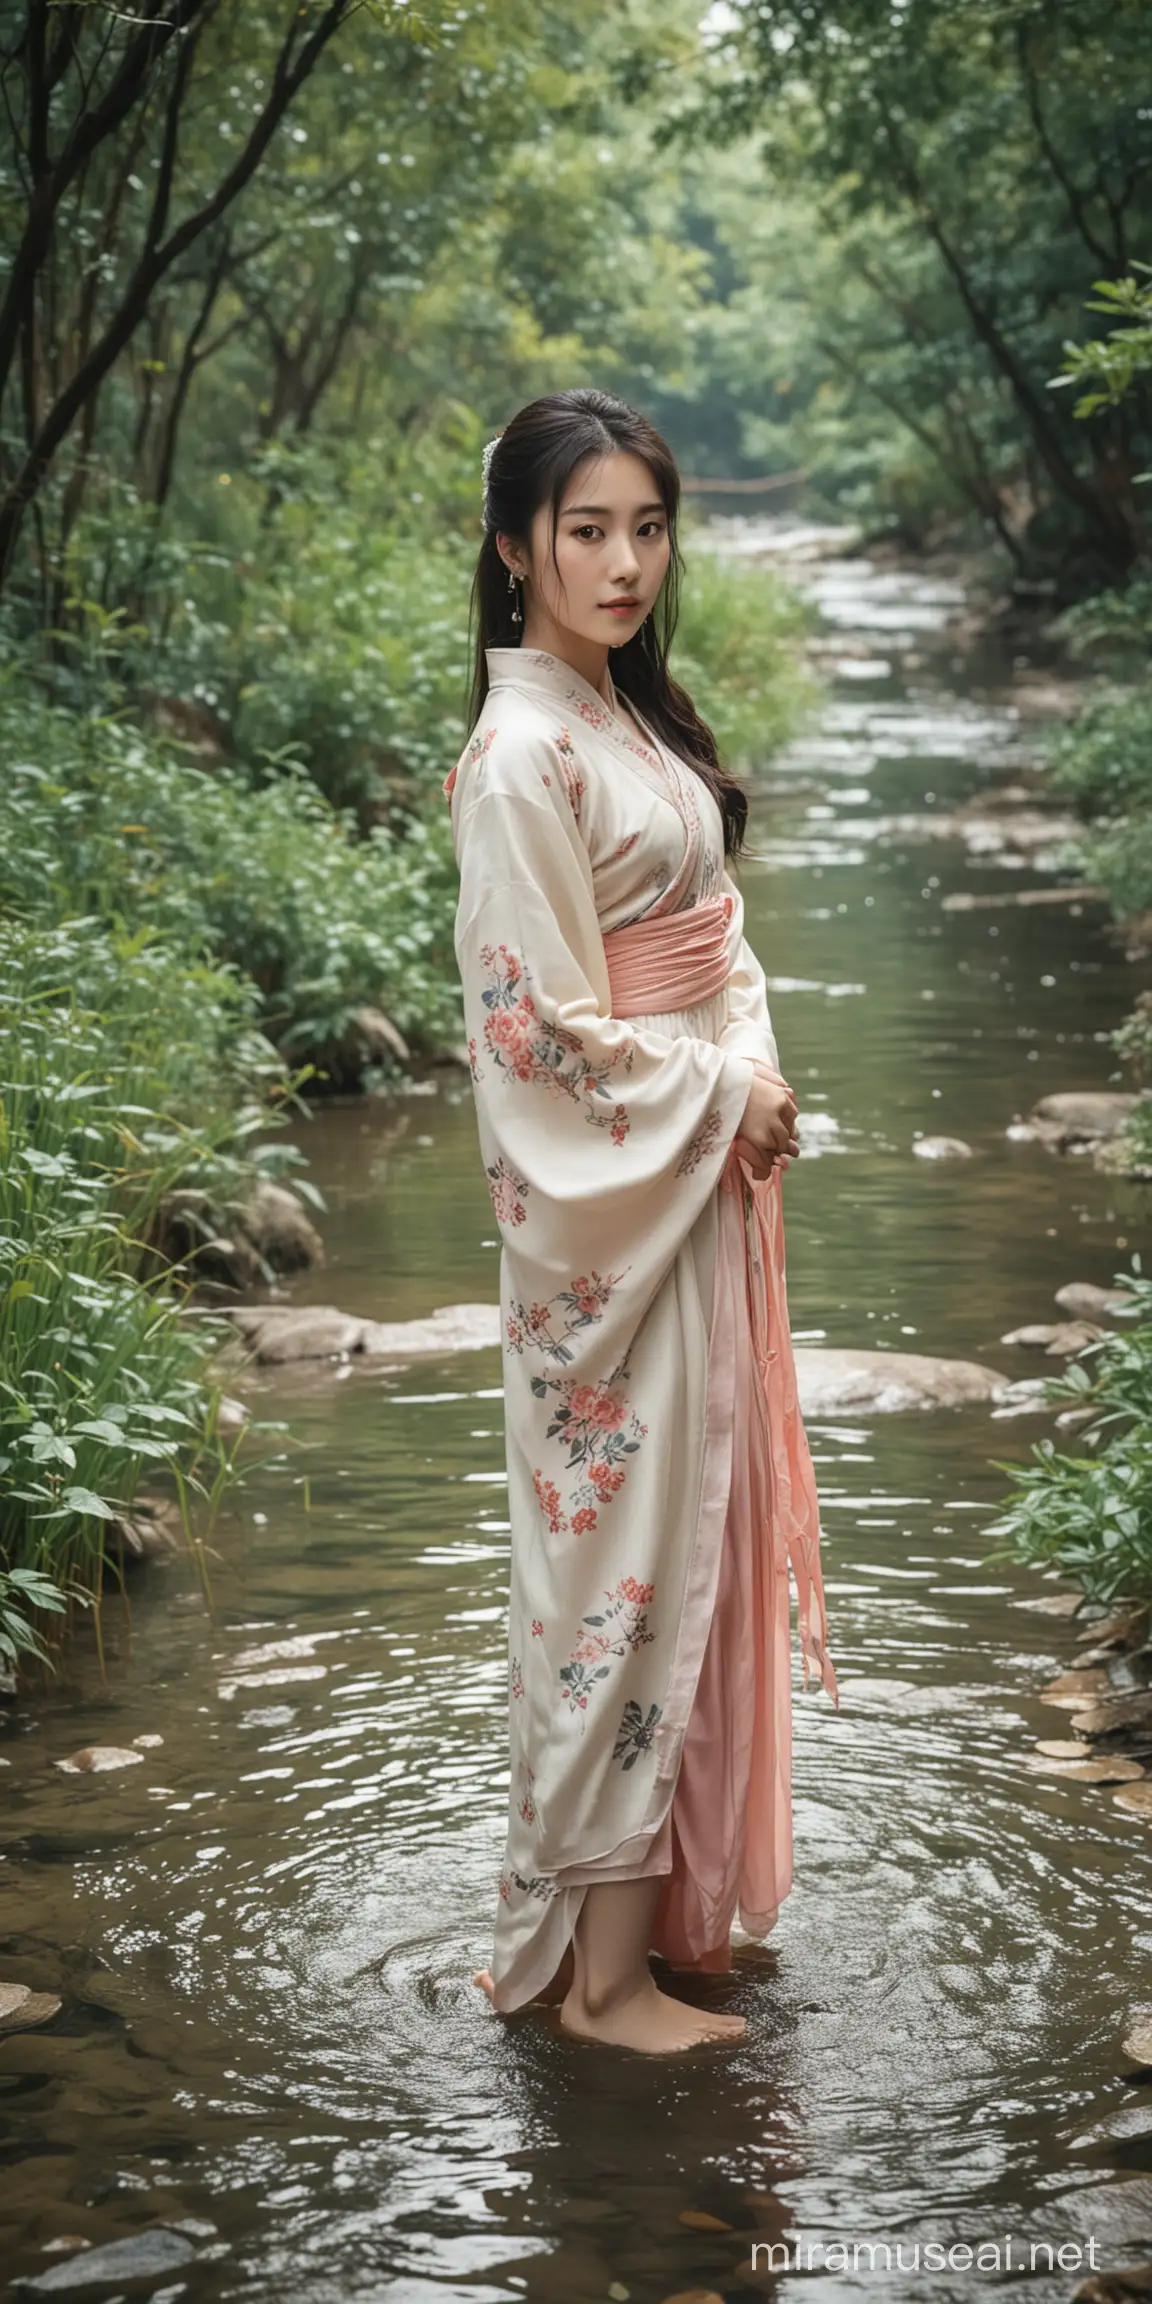 Youthful Elegance Lin Qingxia by the Stream in 1980s Chinese Fashion